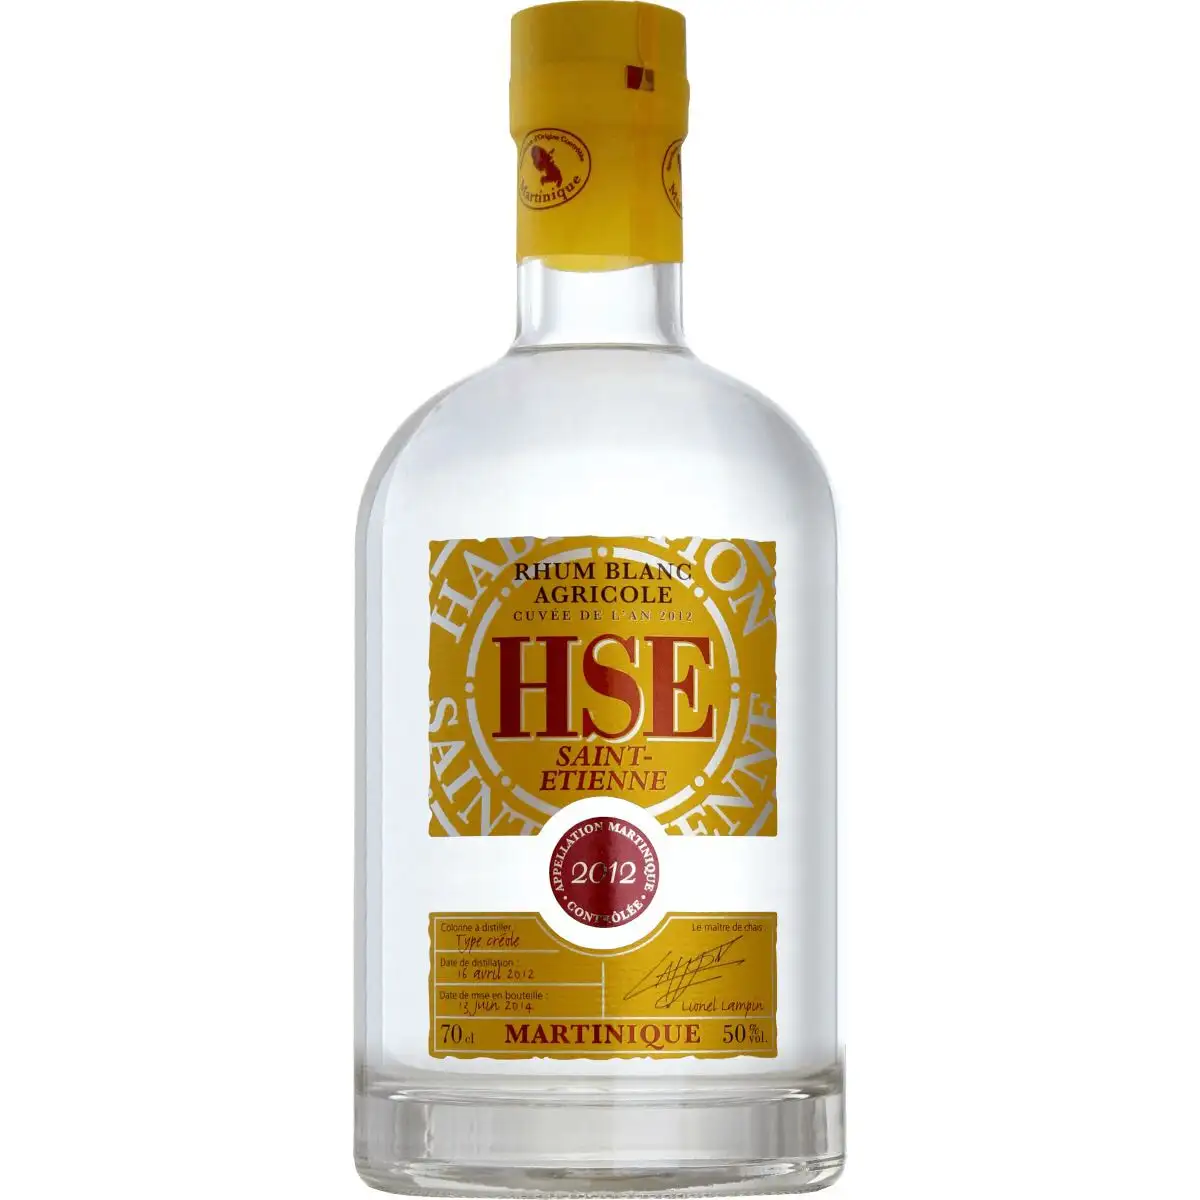 Image of the front of the bottle of the rum HSE Cuvée de l‘an 2012